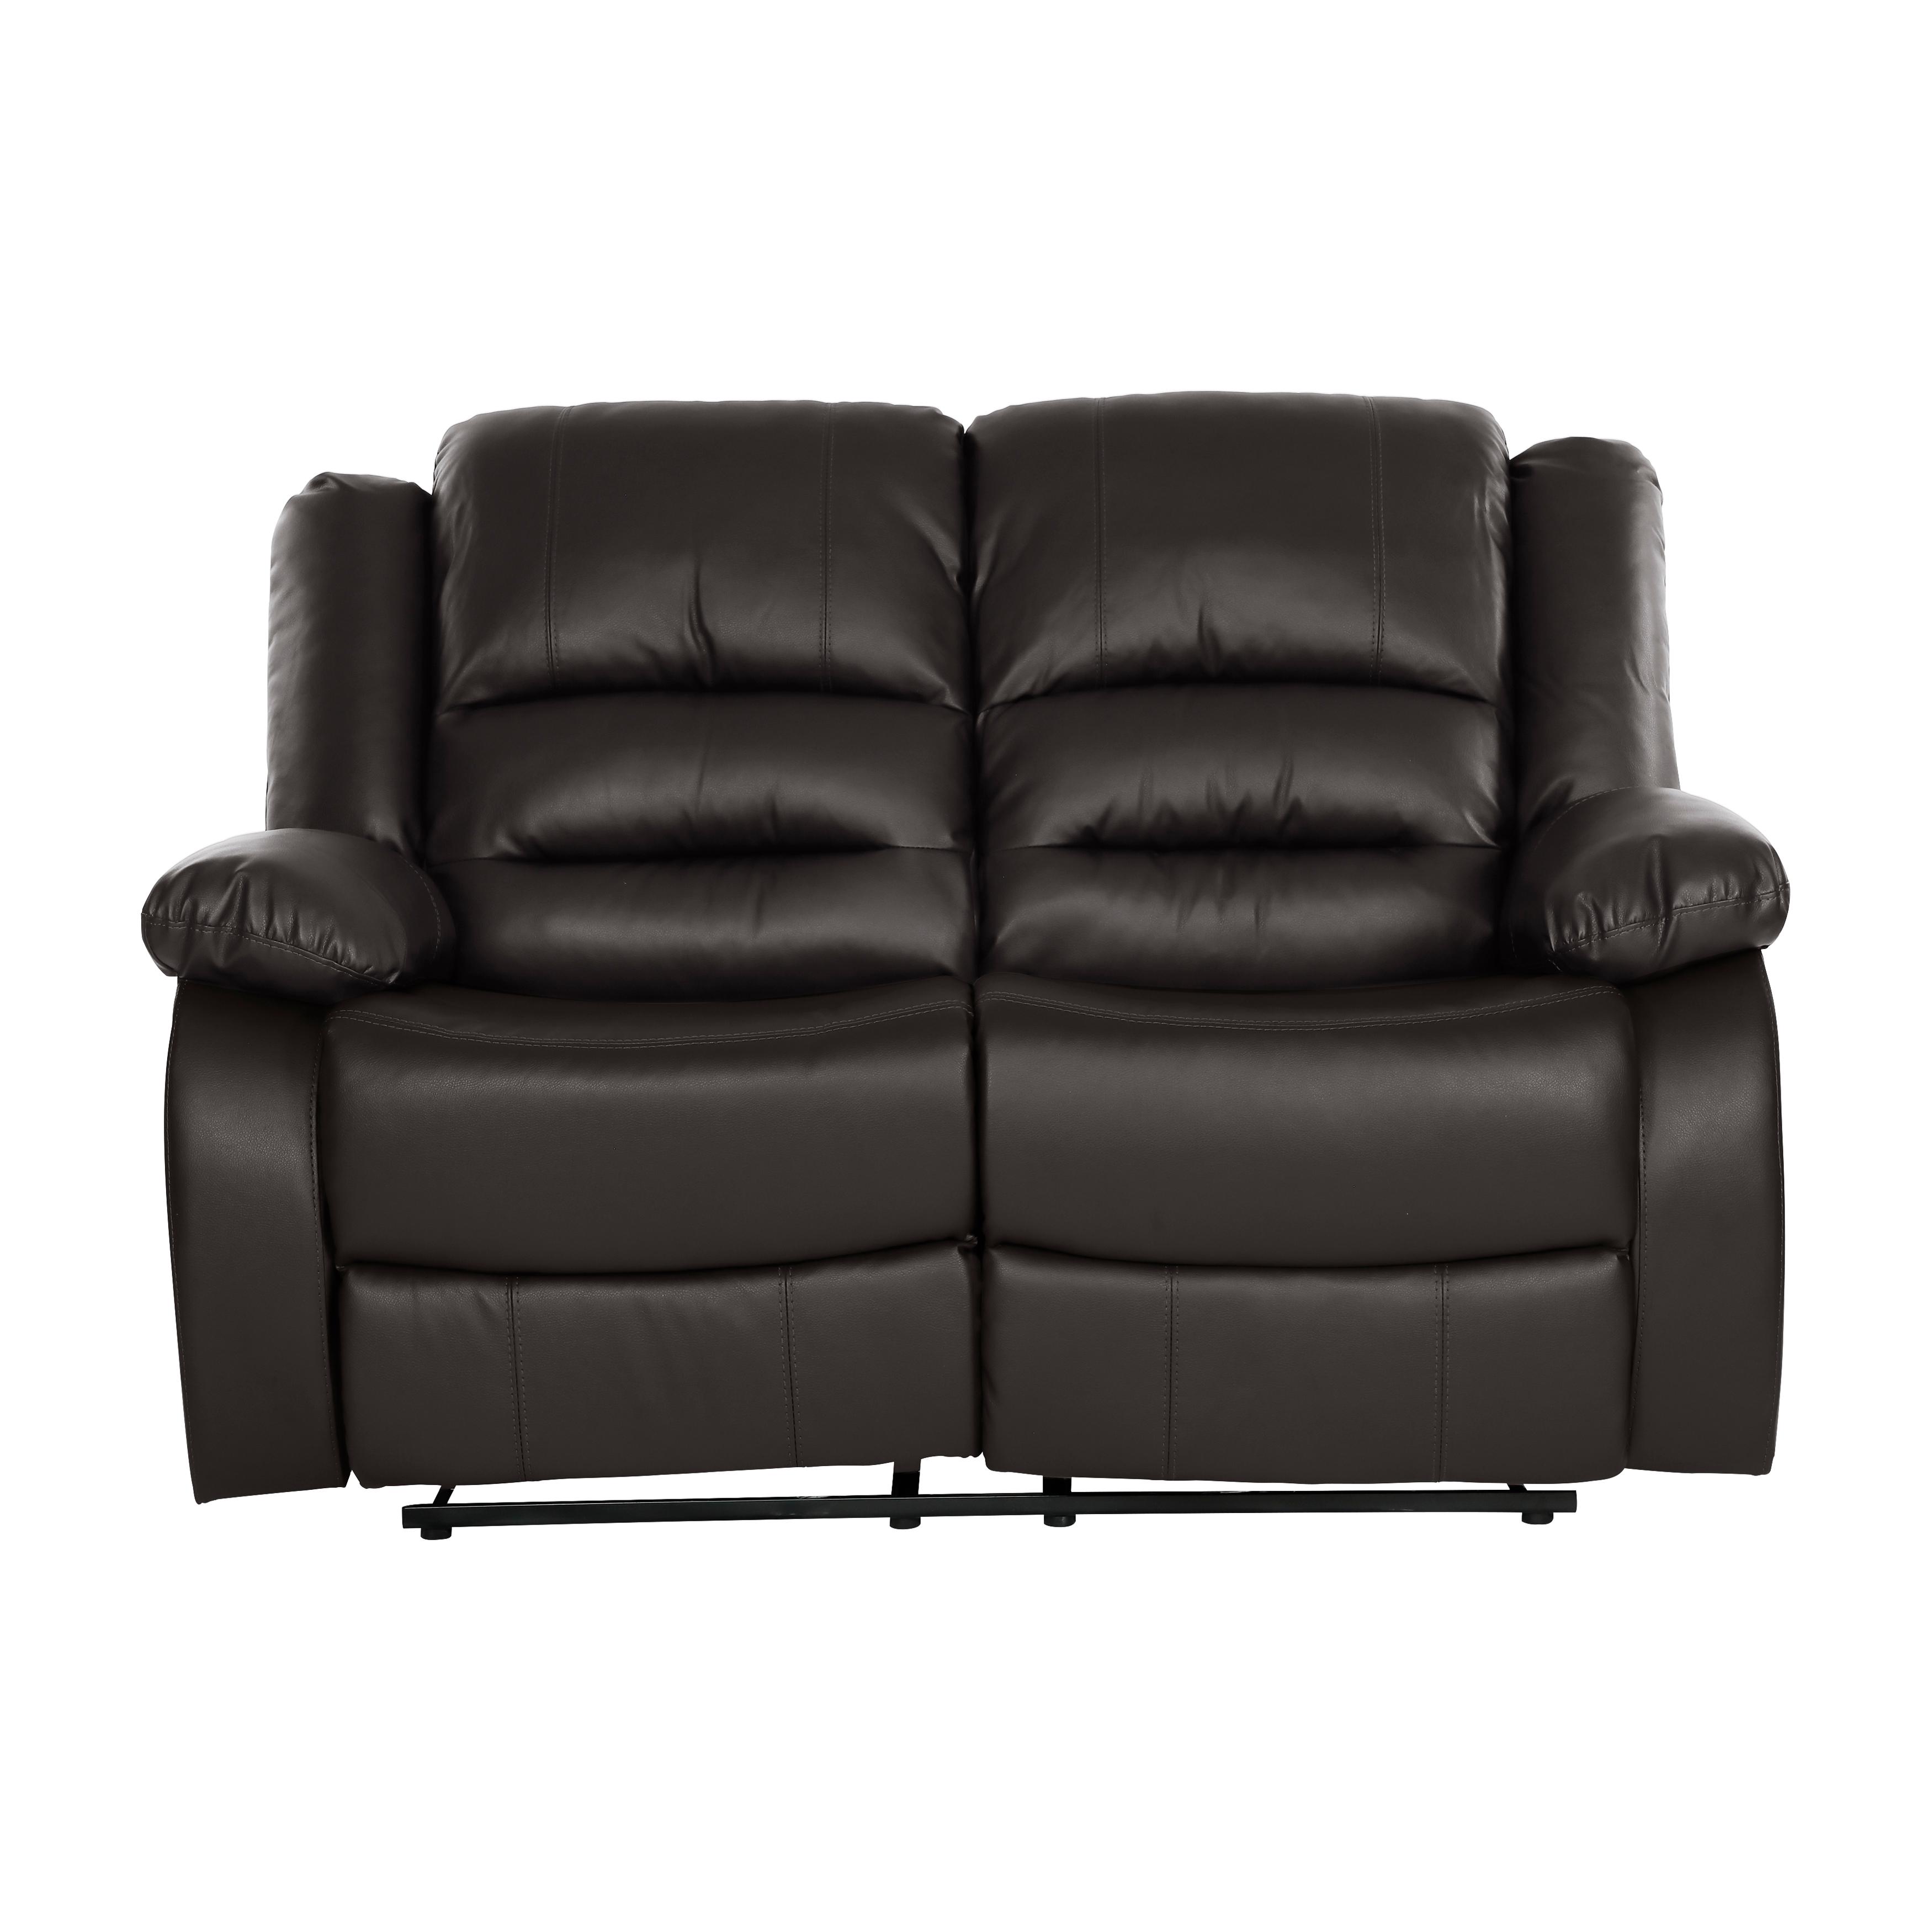 Transitional Recliner Loveseat Jarita Recliner Loveseat 8329BRW-2-L 8329BRW-2-L in Brown Faux Leather